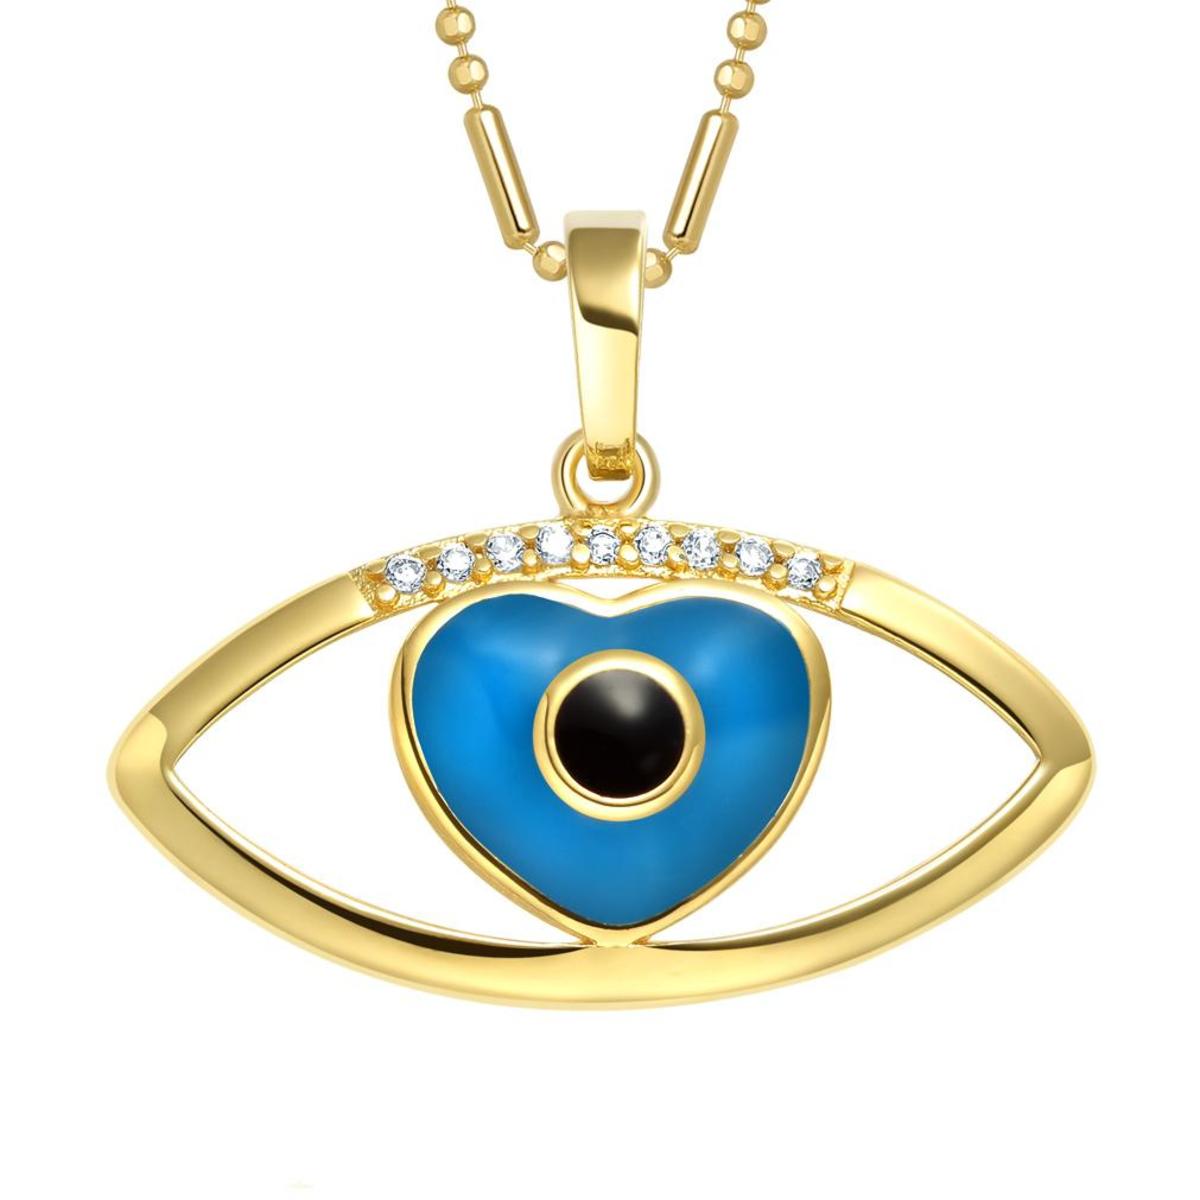 The evil eye is one of the most ancient symbols in existence